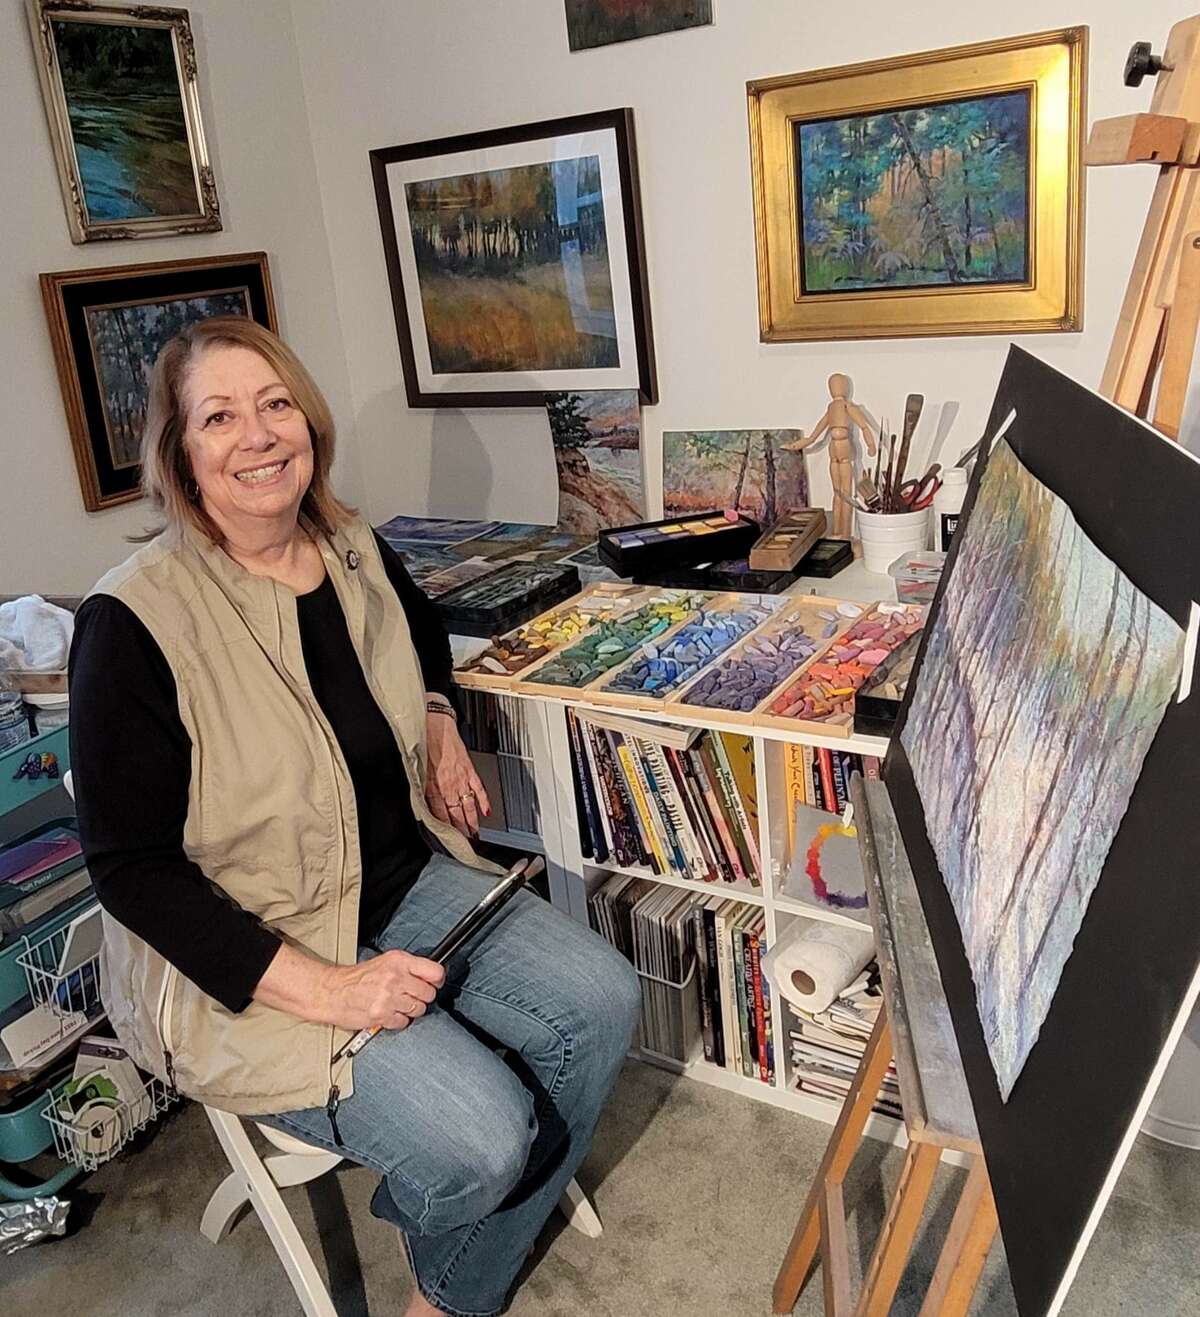 Nancy Knapp is a Caseville resident and is a pastel artist, using the natural beauty of the Thumb to inspire her paintings that she shares with the community.